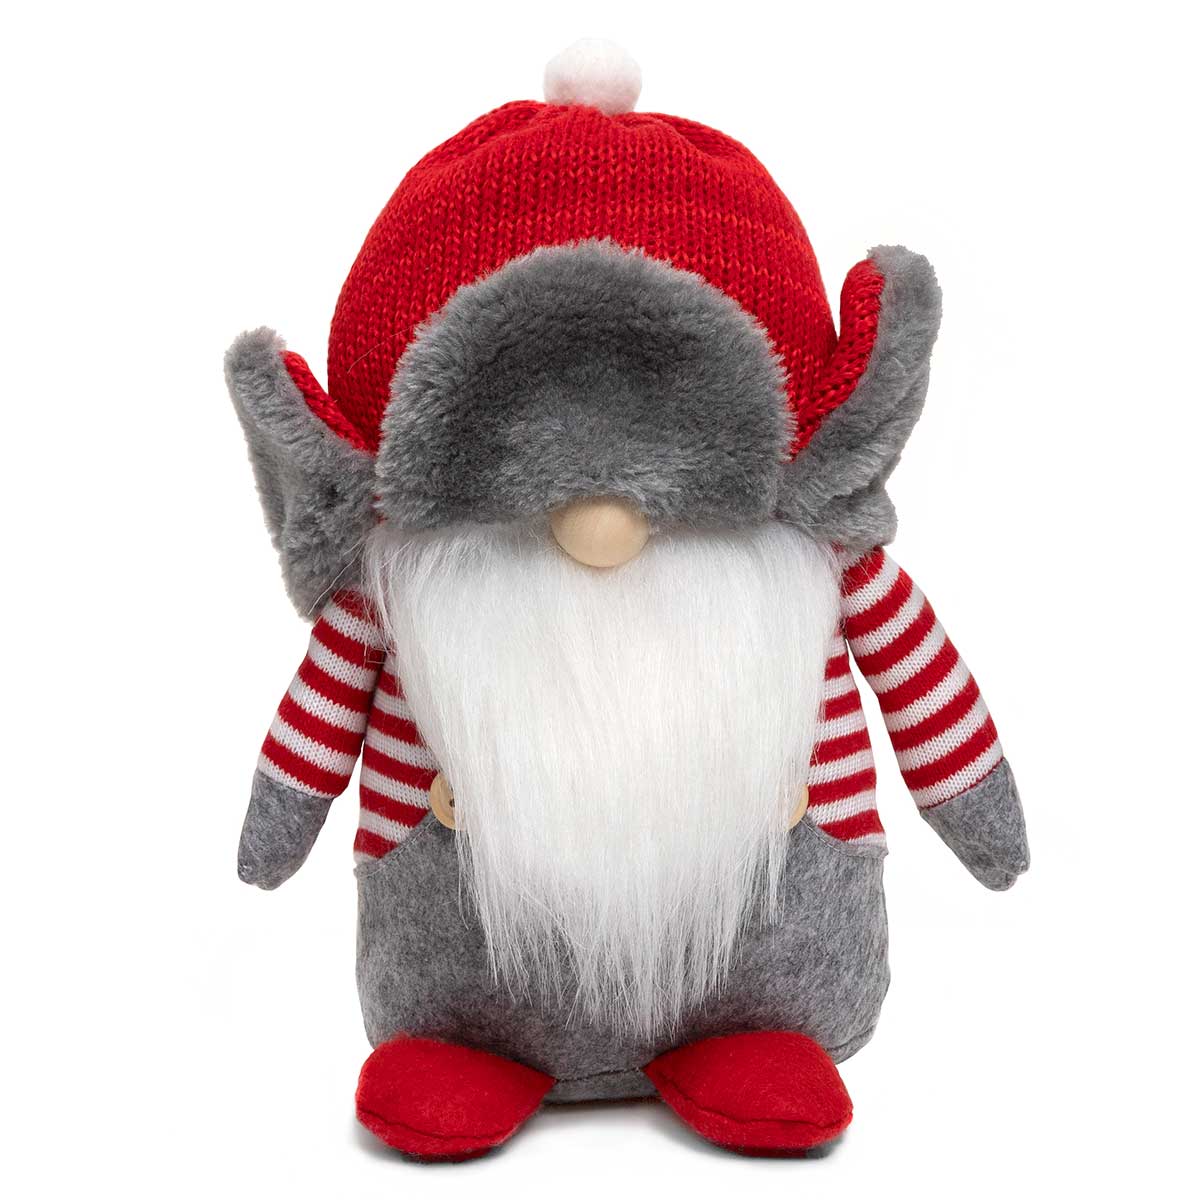 COUSIN EDDY GNOME WITH RED/GREY FLAP HAT LARGE